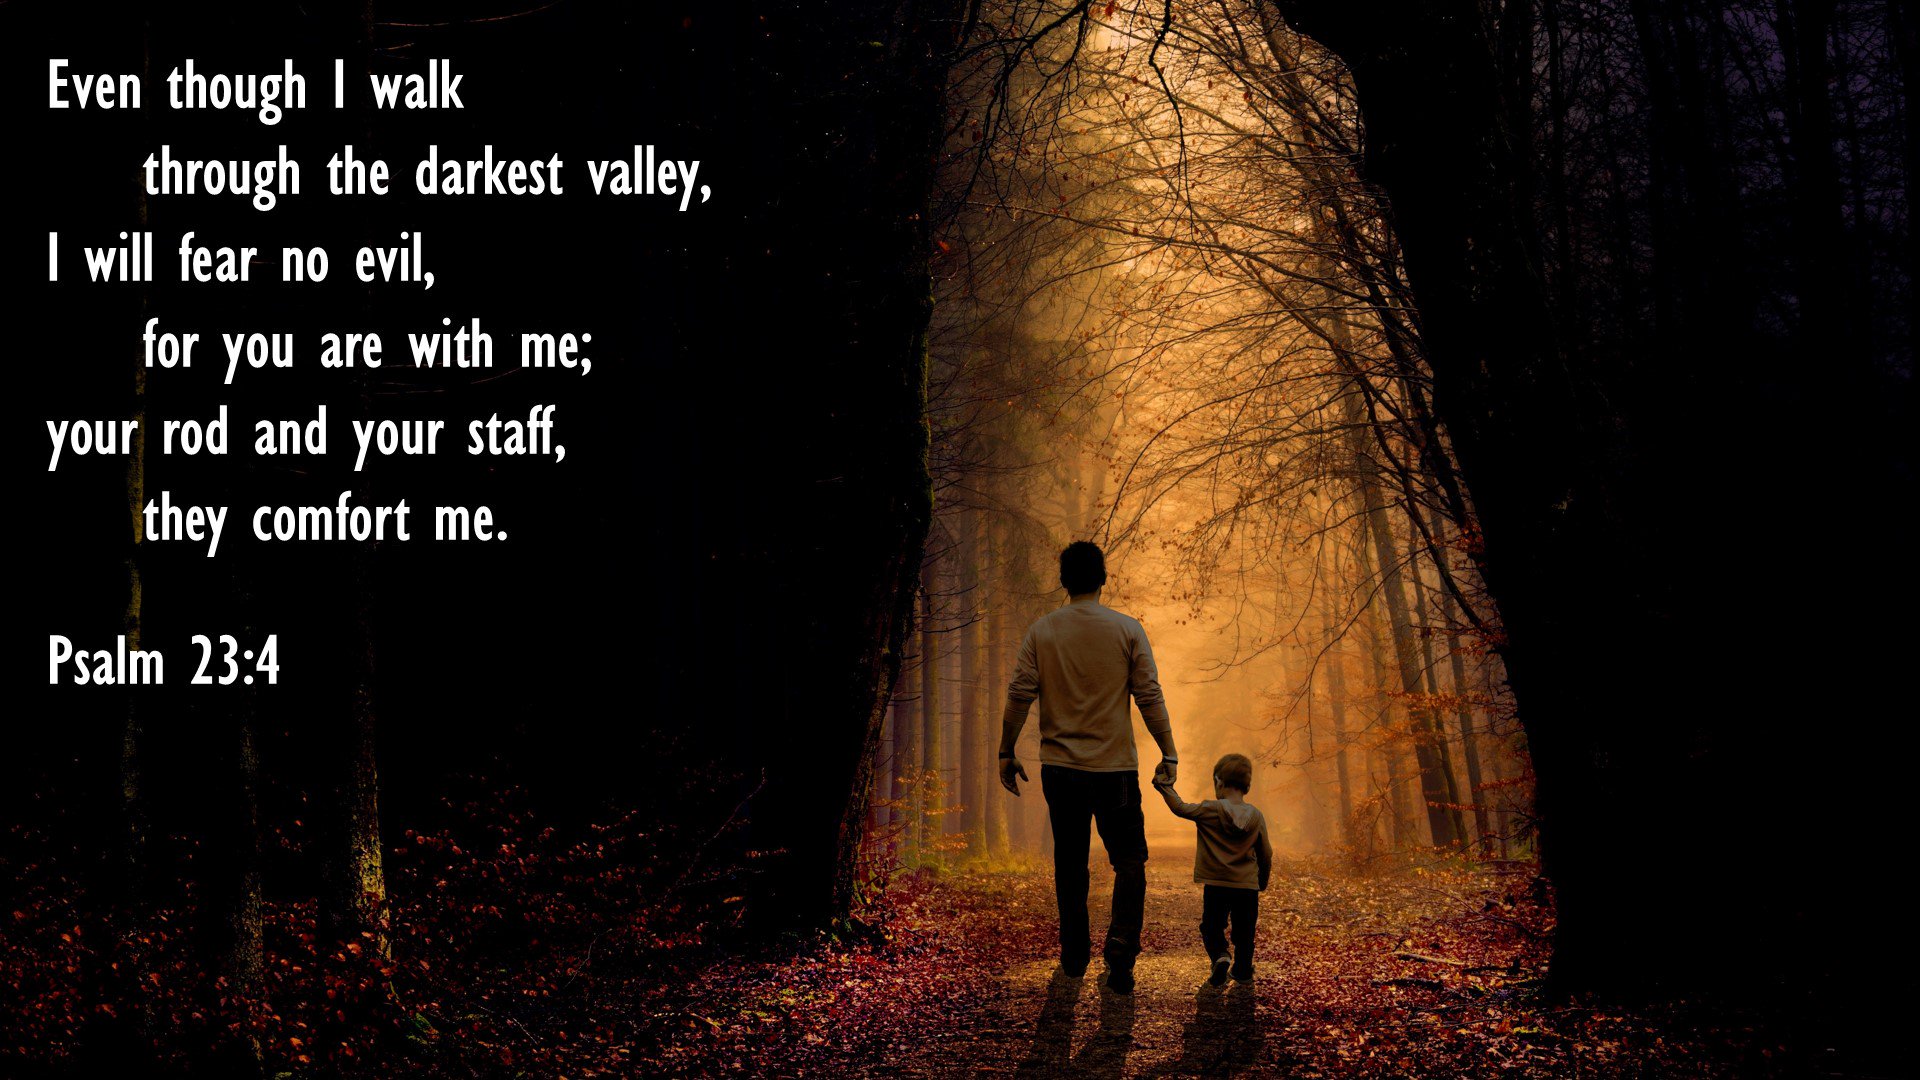 Psalm 23 Bible Verse Images  Psalm 2316 Bible Verse Pictures